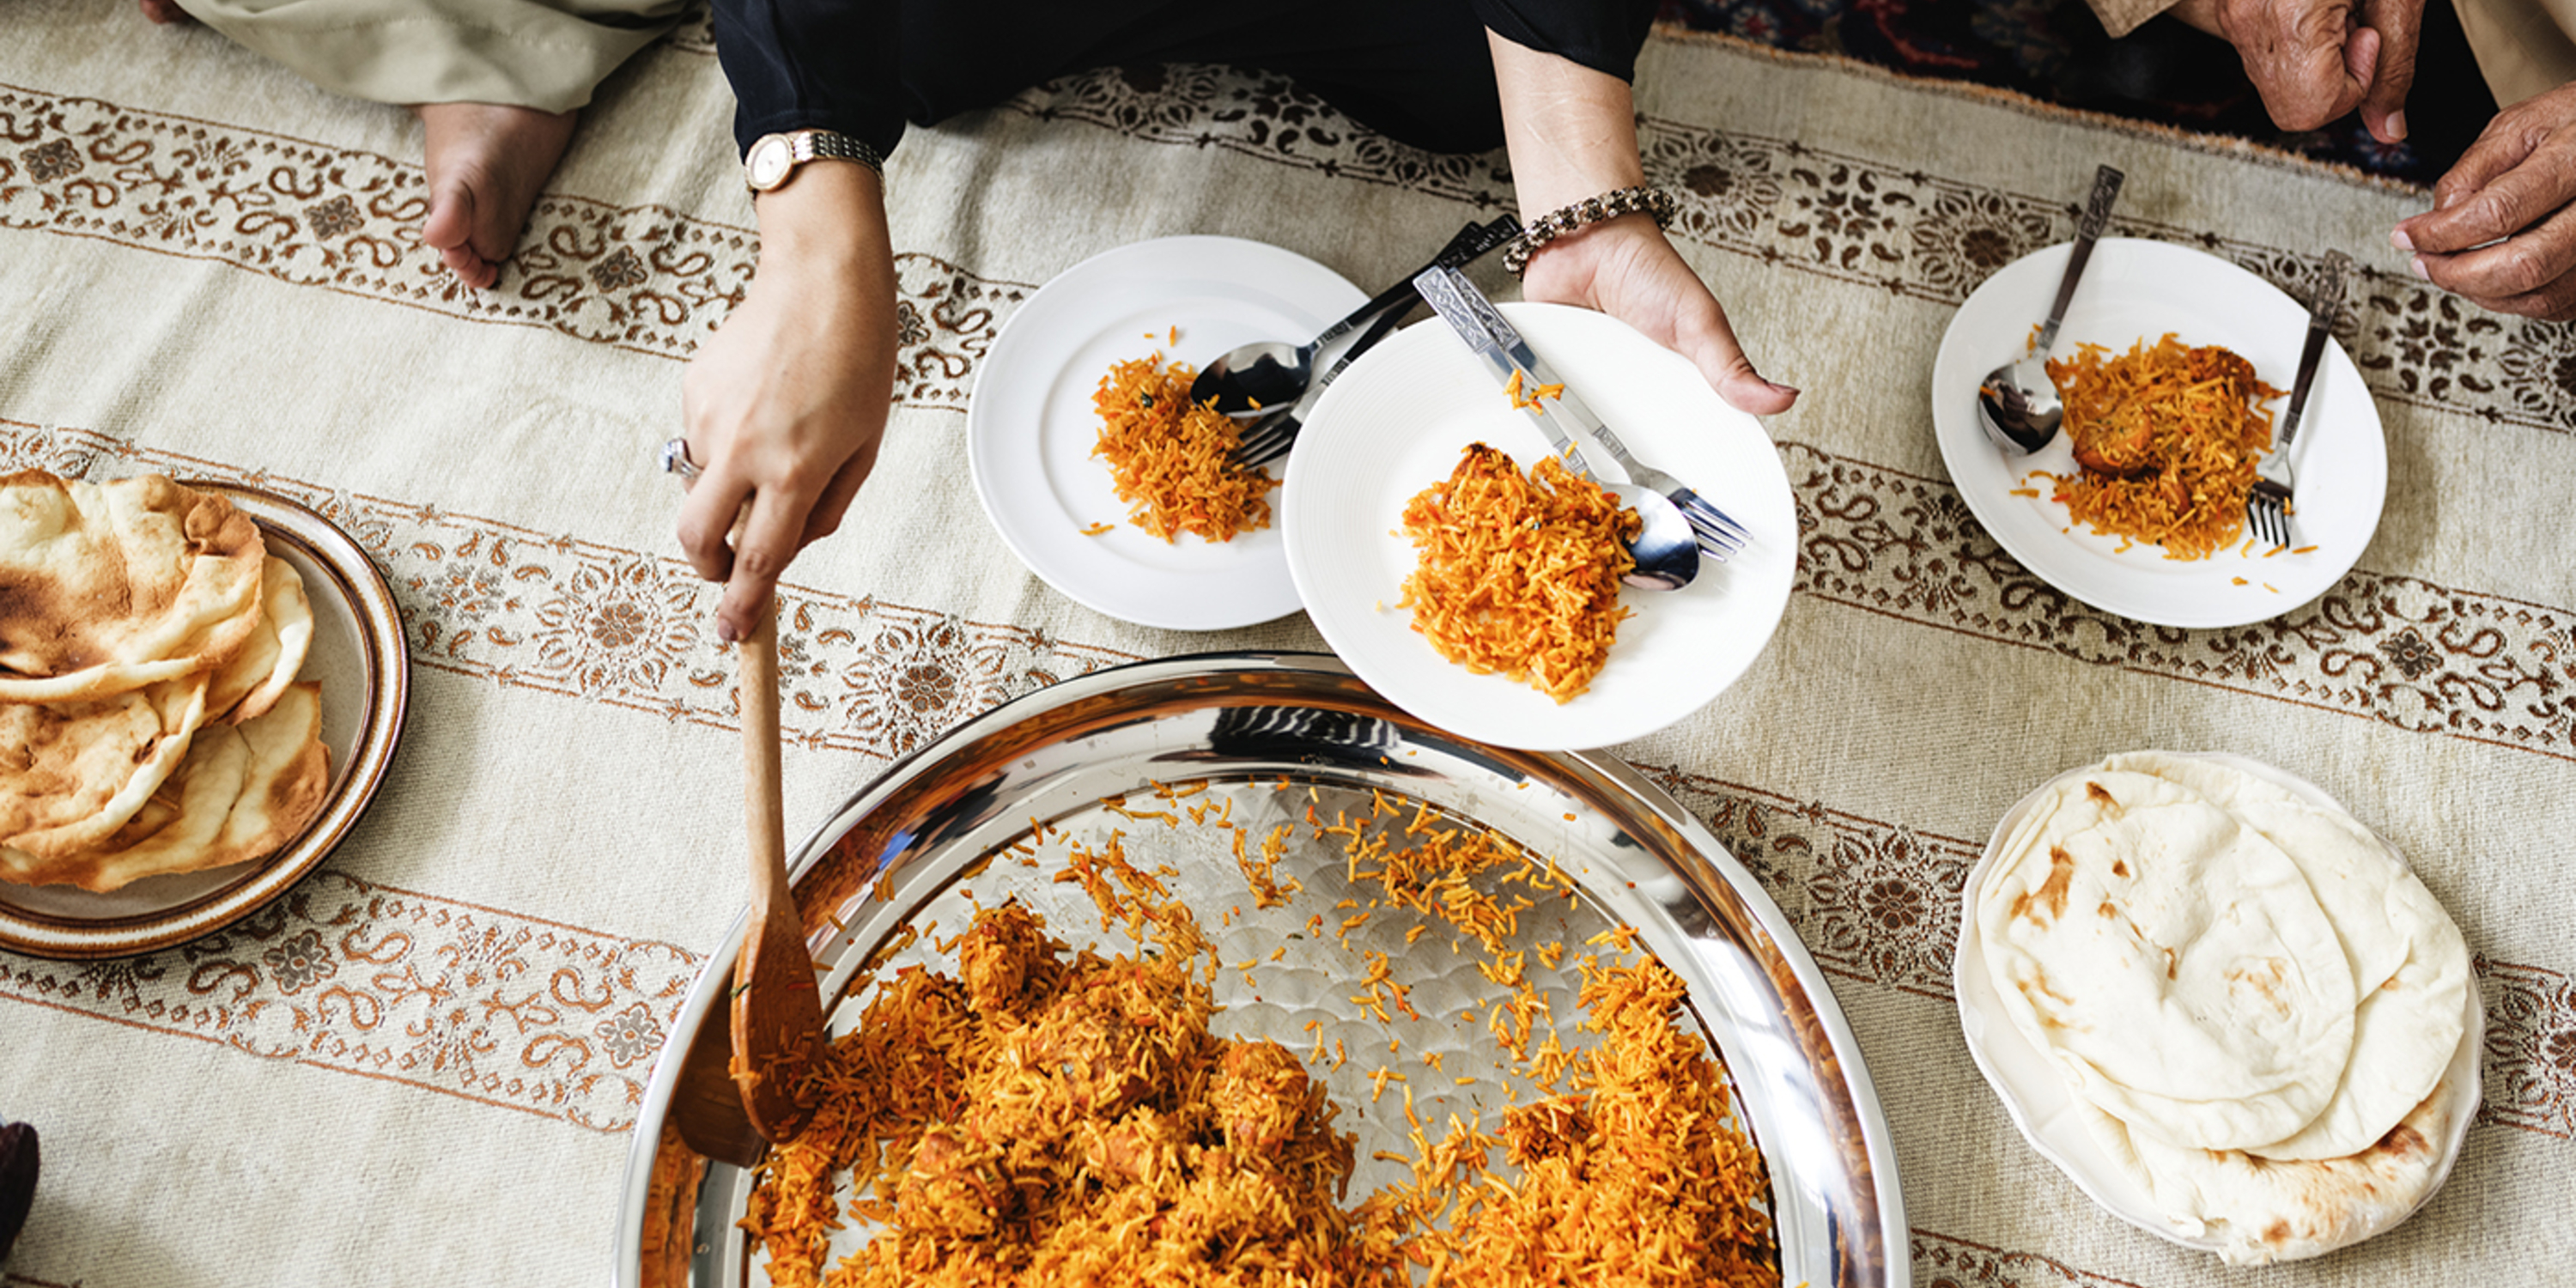 Top view of person serving themself a rice dish from a table of food